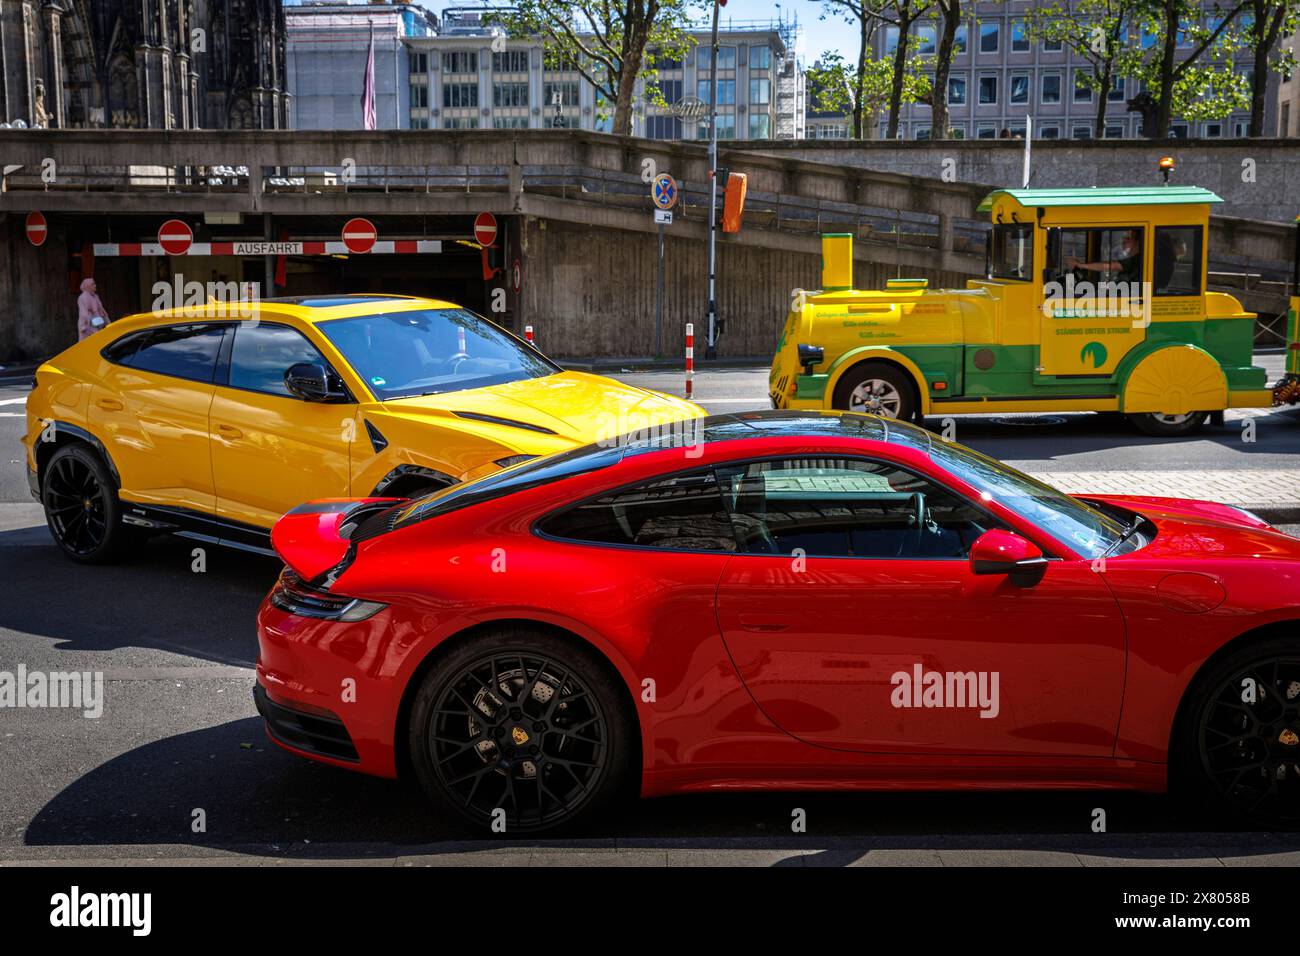 a Porsche 911 and a Lamborghini Urus stand in front of the of the Excelsior Hotel Ernst, in the background the Cologne Bimmelbahn for city tours, Colo Stock Photo